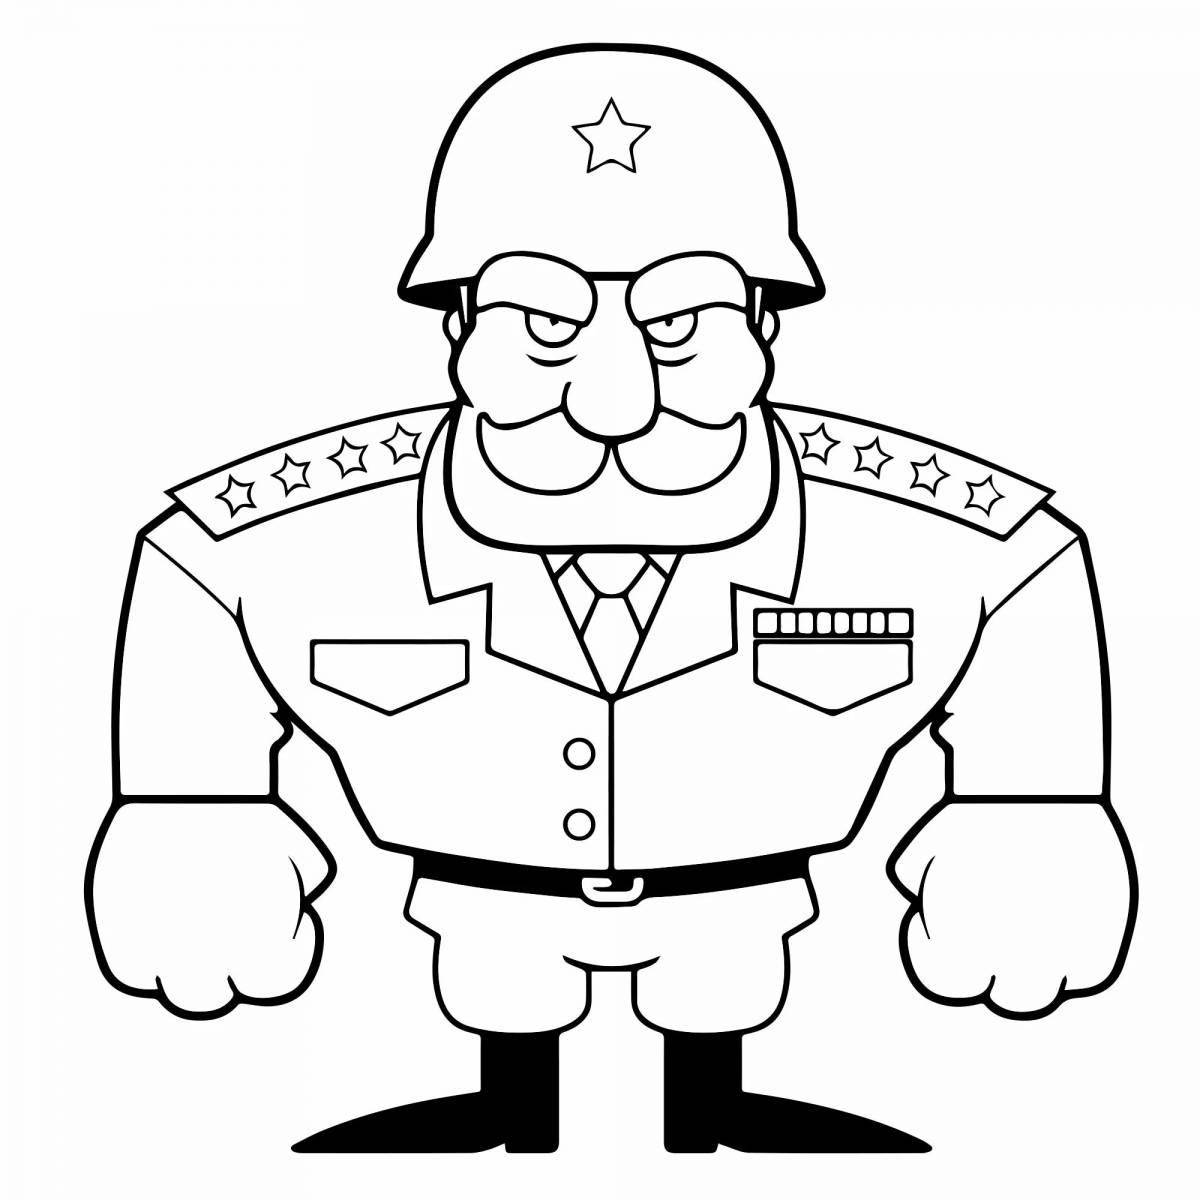 Coloring page involved officer